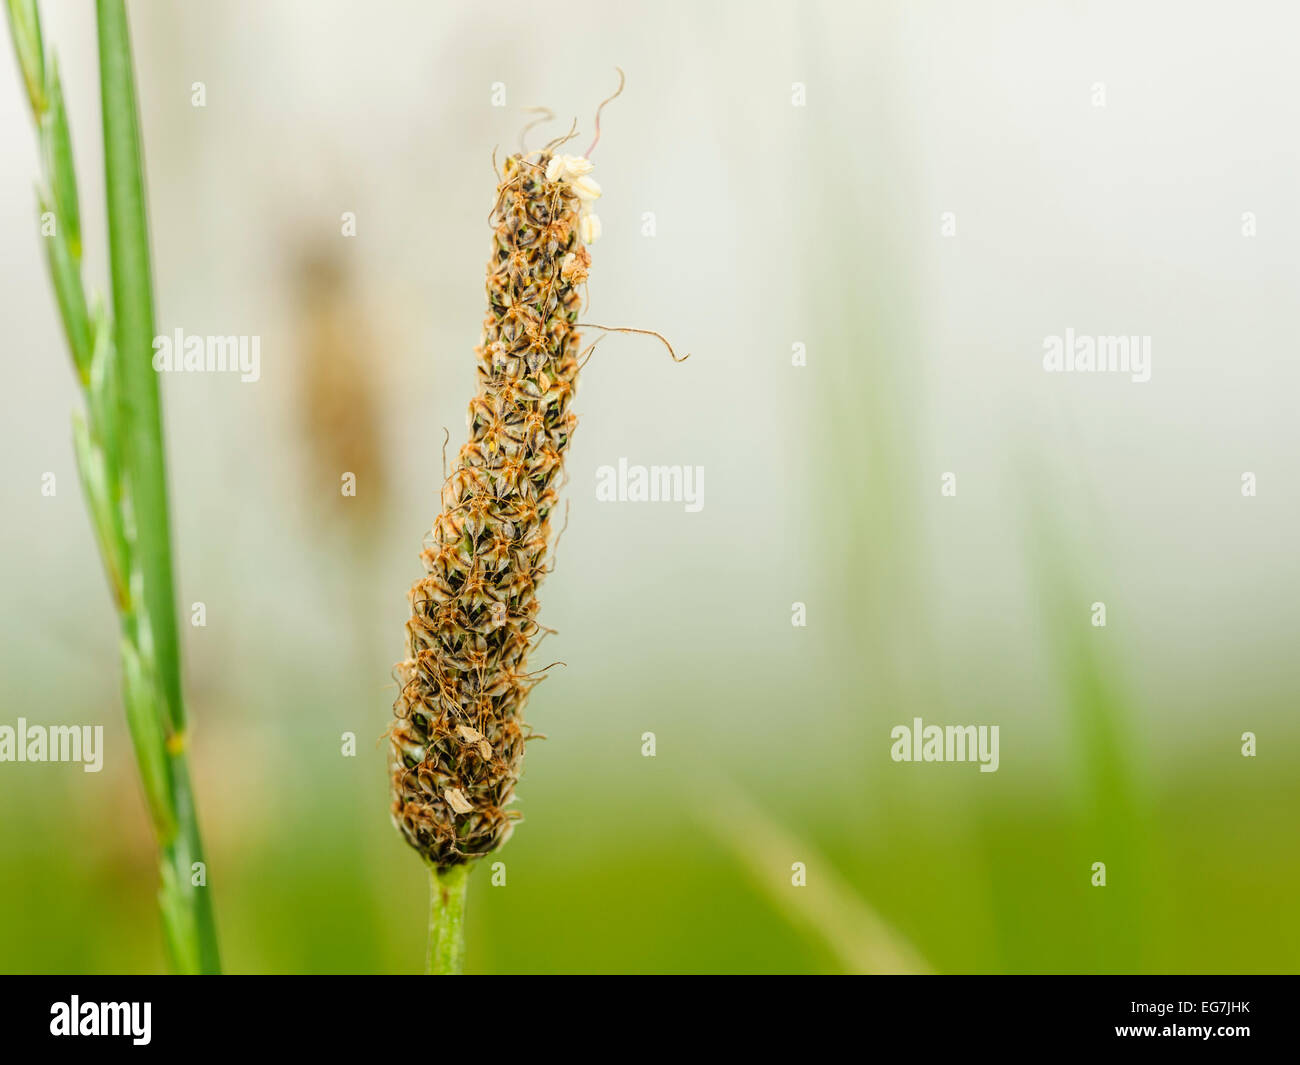 Mature sedge plant with green blurry background in natural environment countryside. Stock Photo